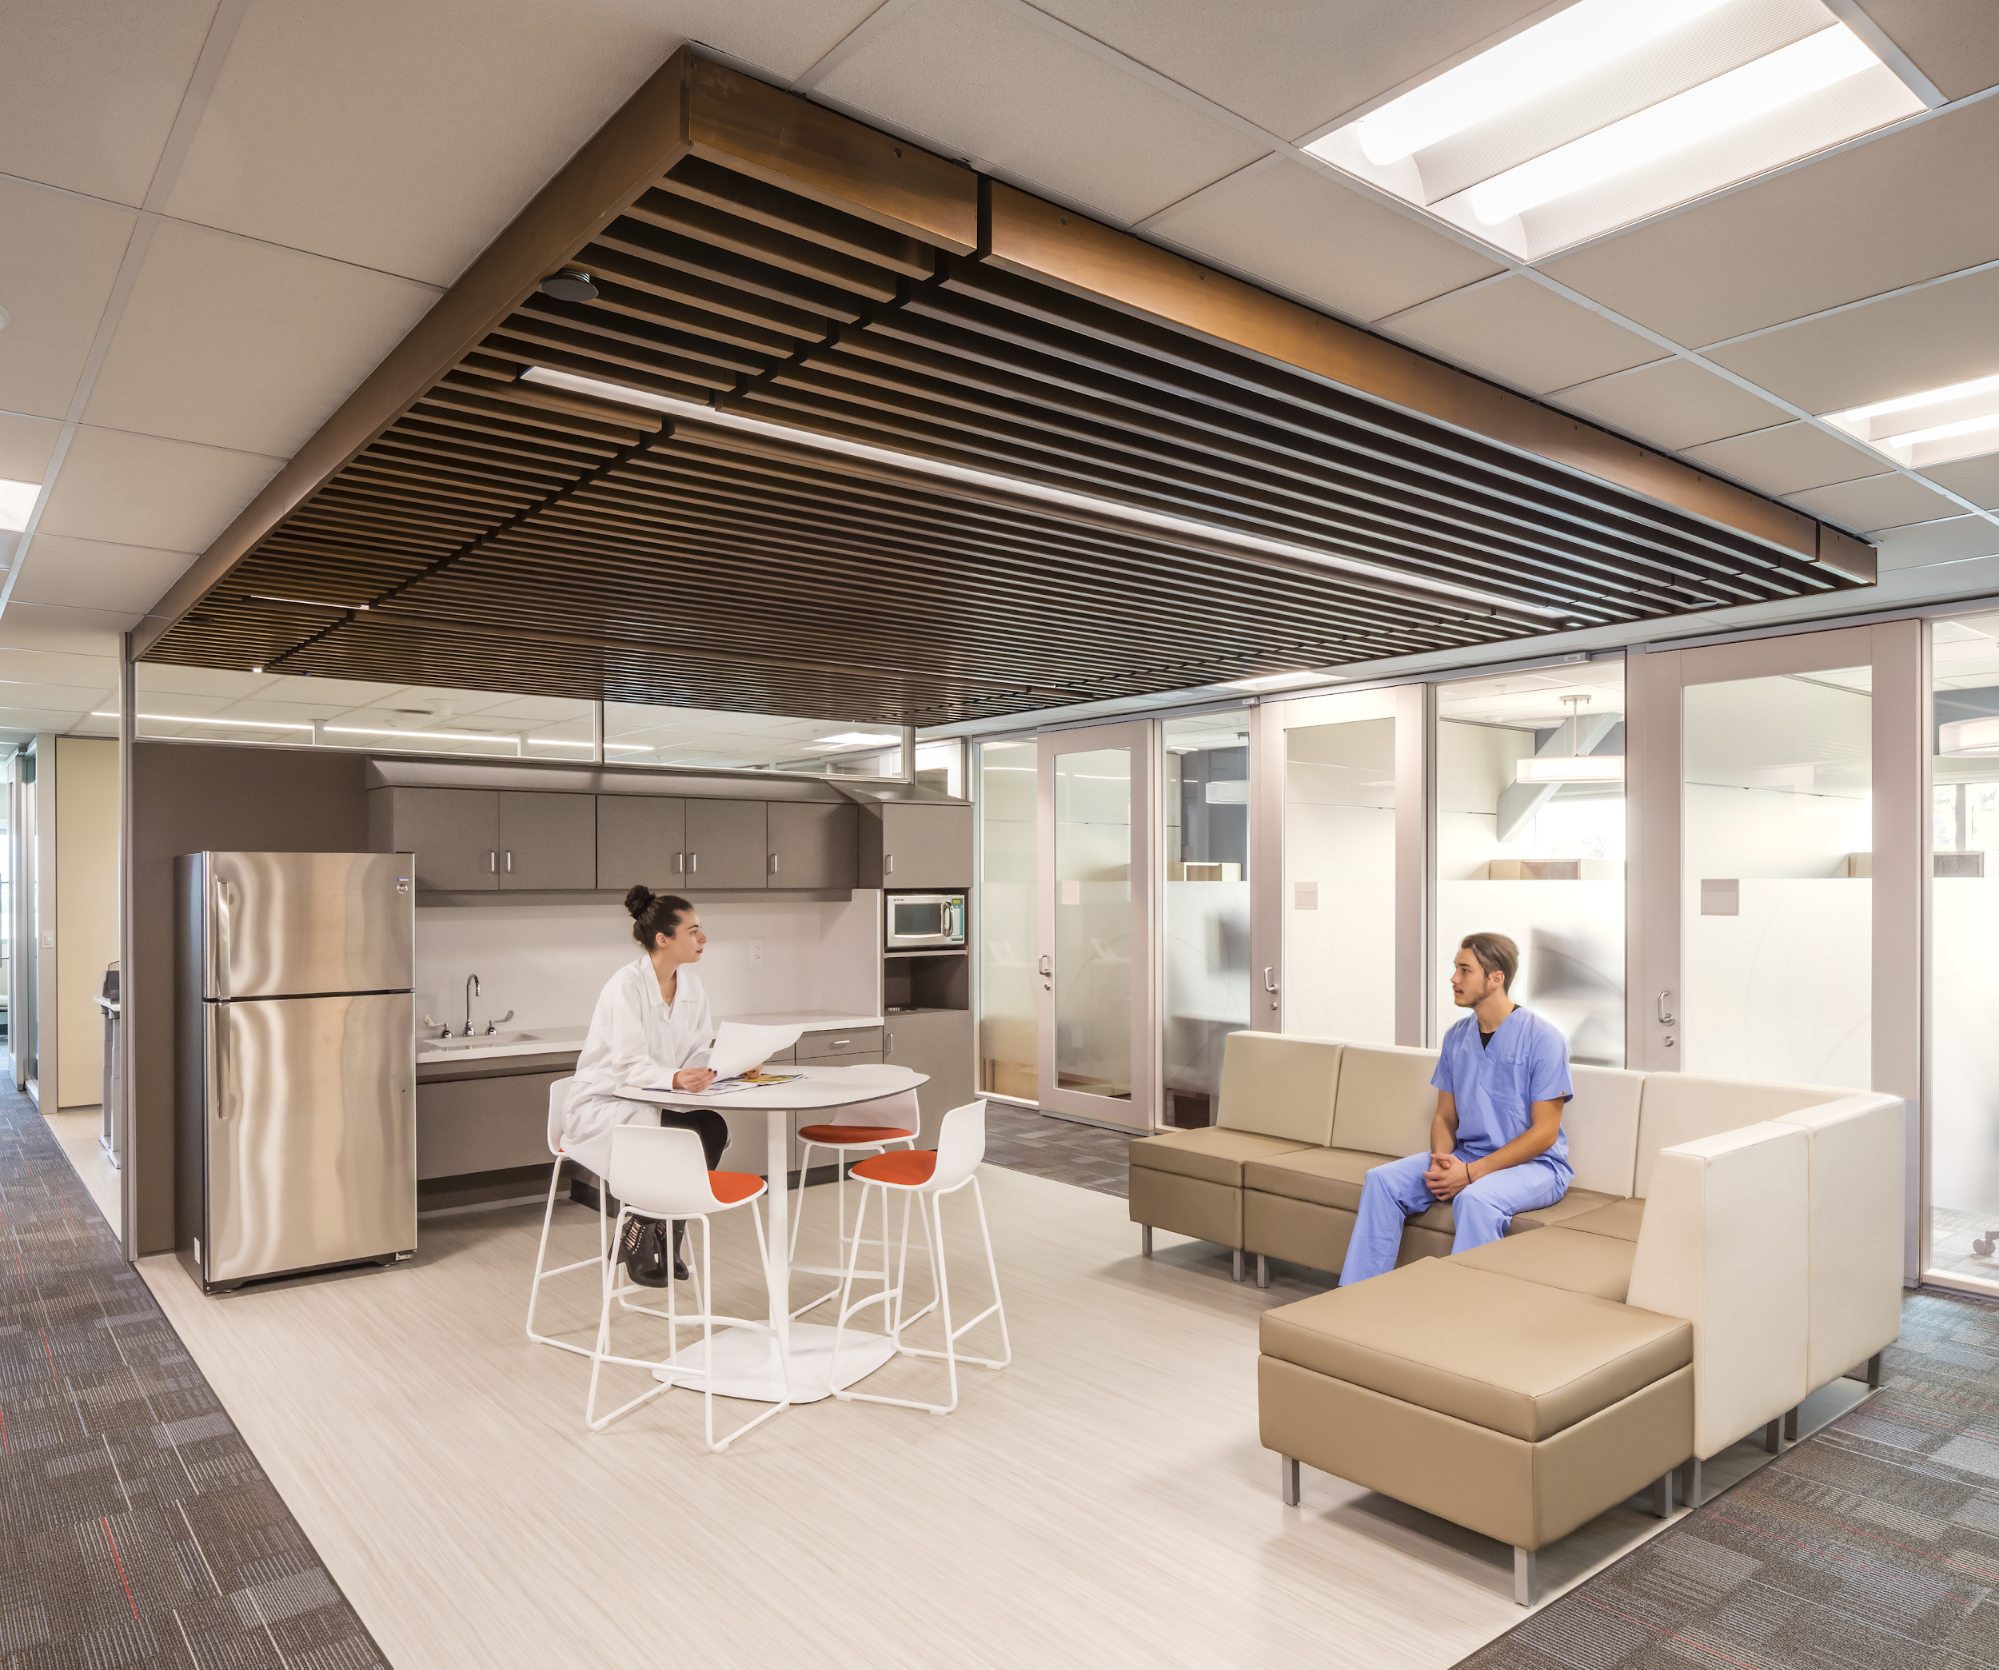 Medical office architects prioritize patient care.